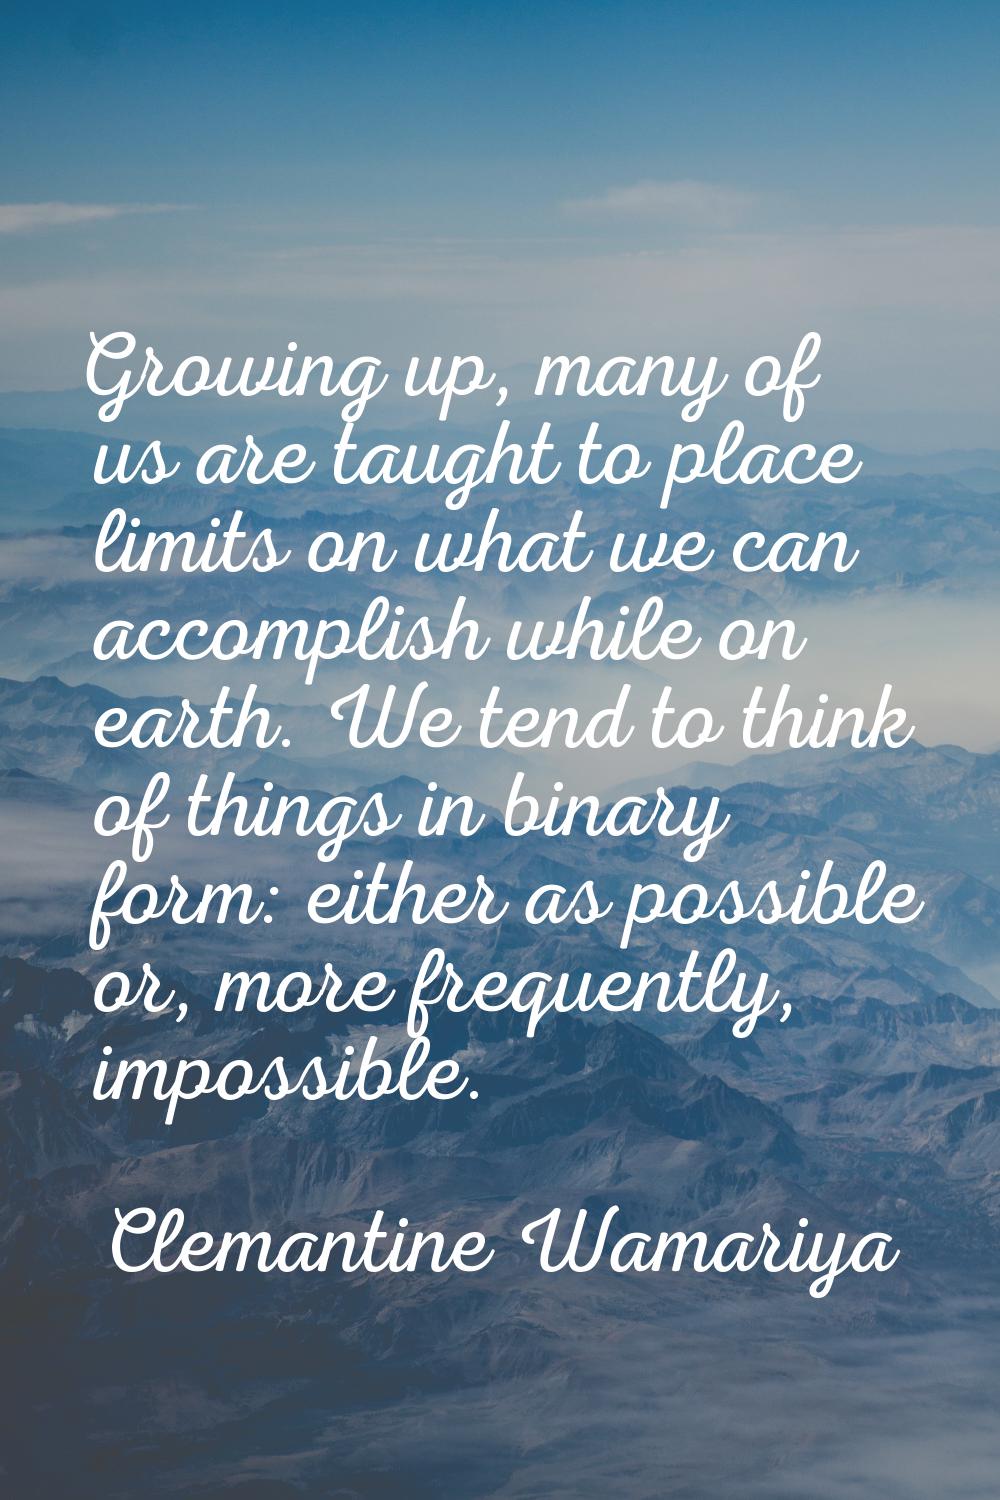 Growing up, many of us are taught to place limits on what we can accomplish while on earth. We tend